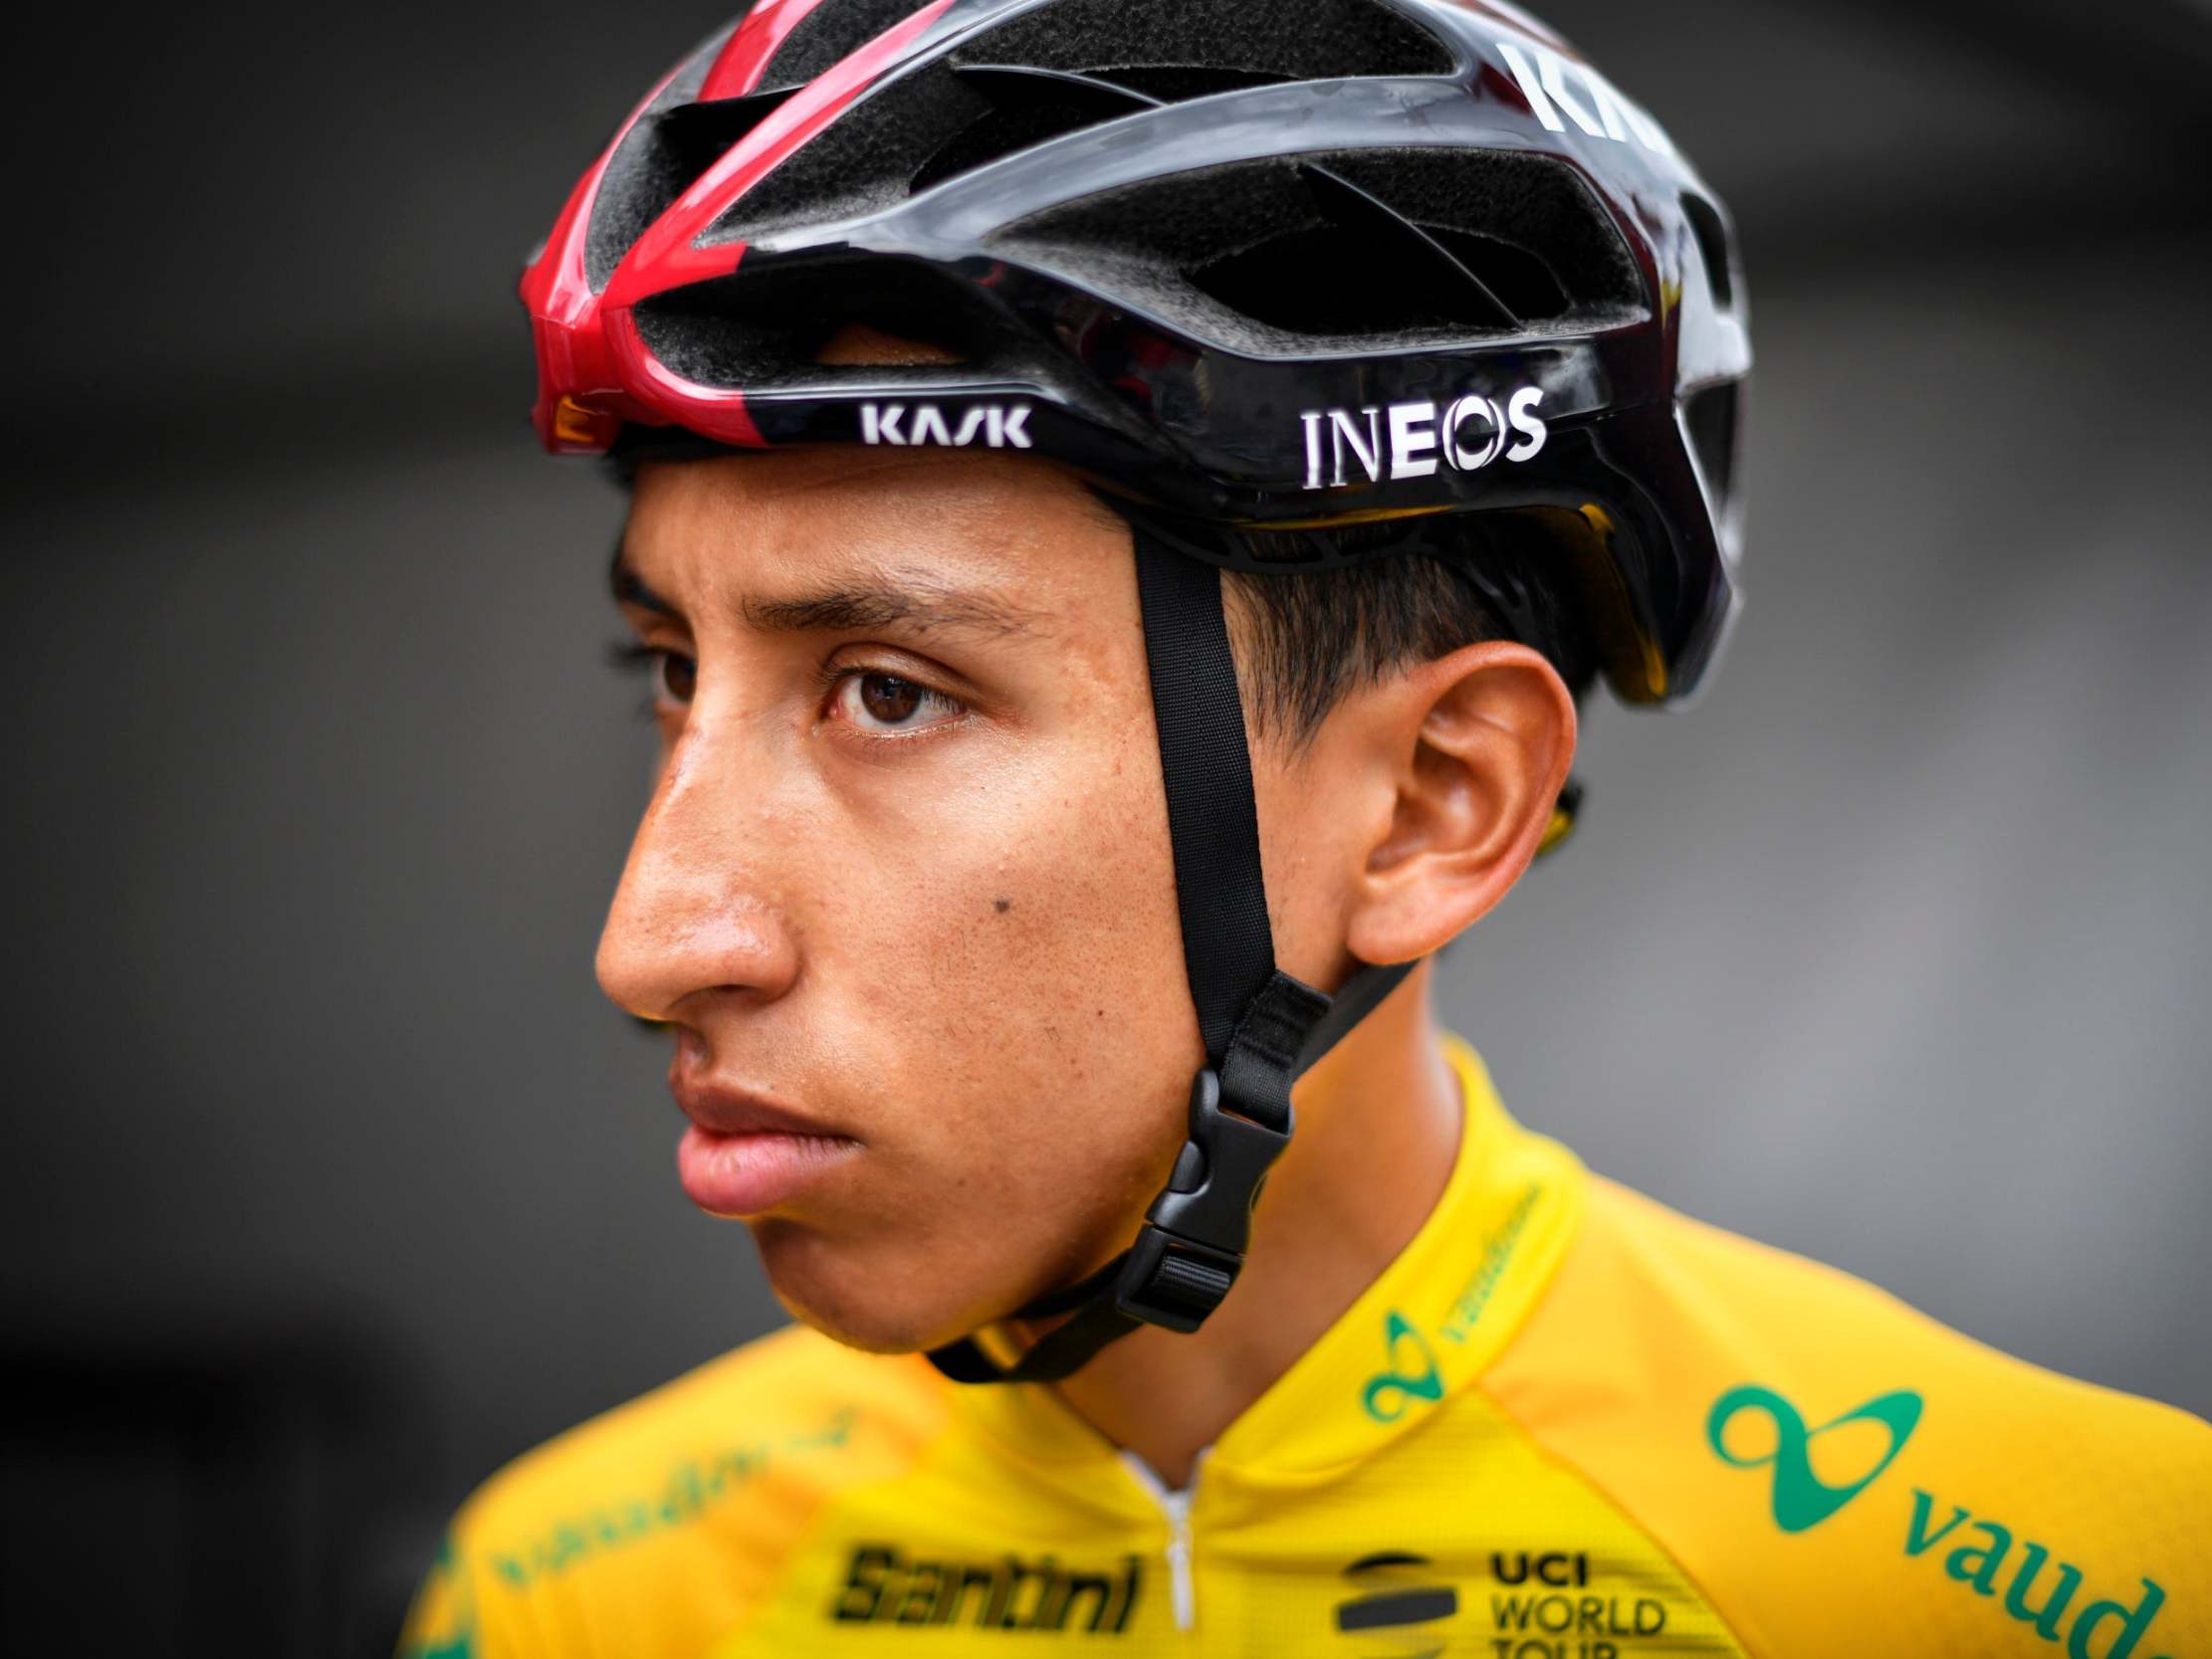 Tour de France 2019 Why Team Ineoss move to make Egan Bernal co-leader with Geraint Thomas matters The Independent The Independent